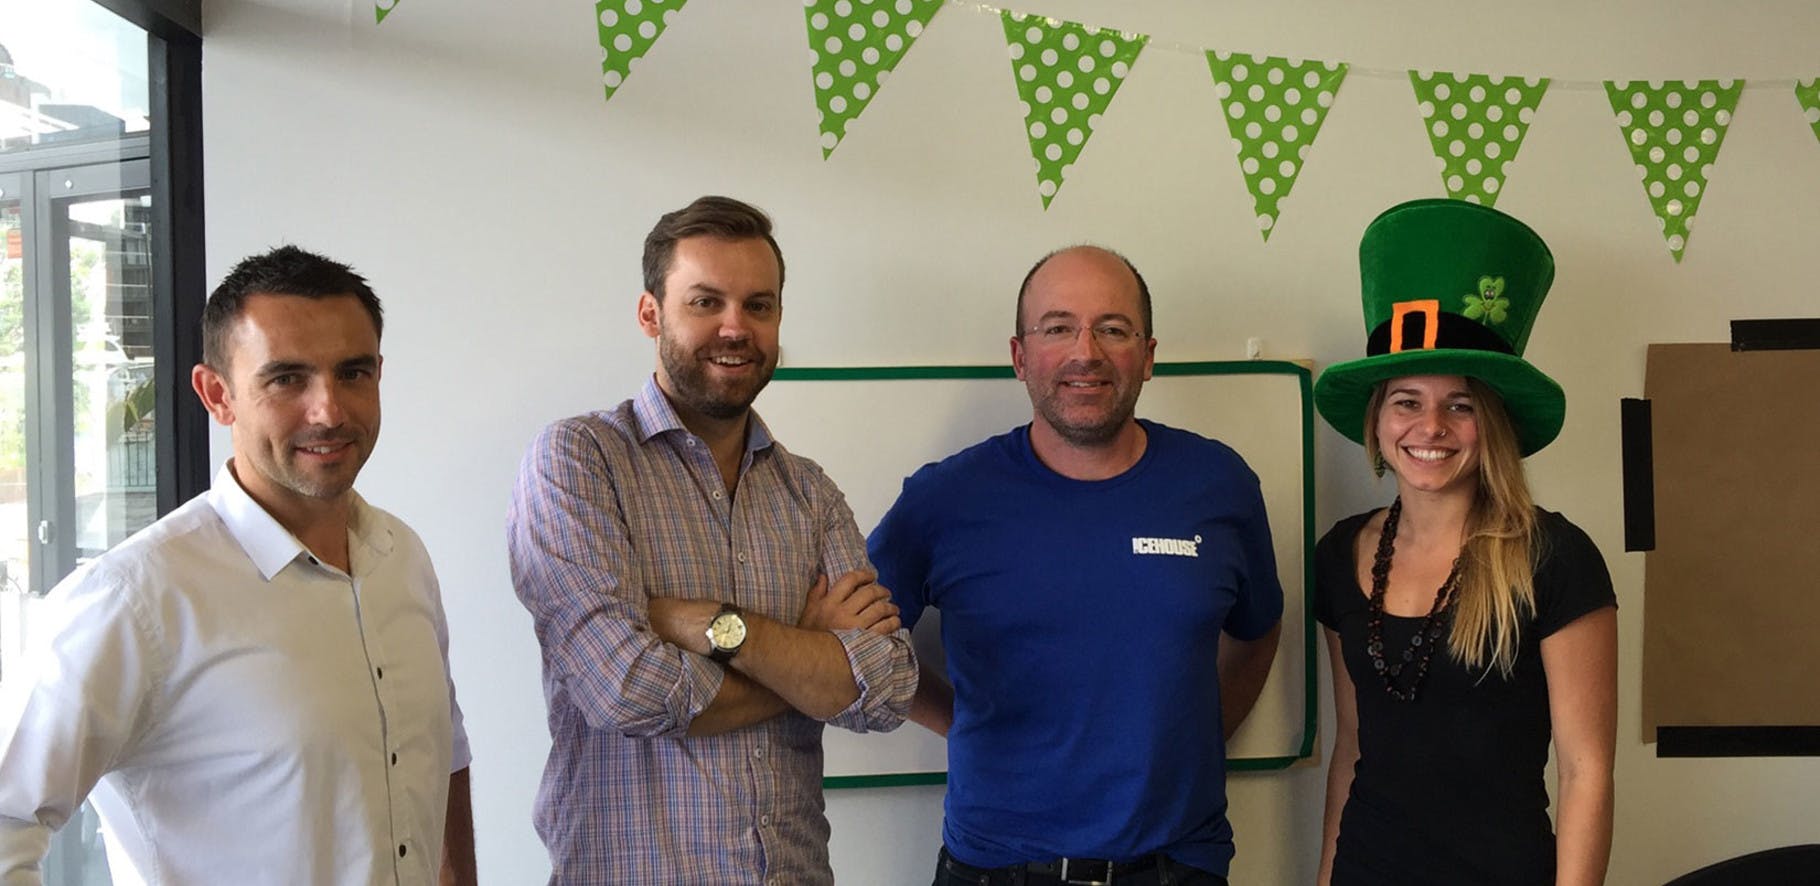 A group of four people are posing in an office along with St Patricks day decorations.